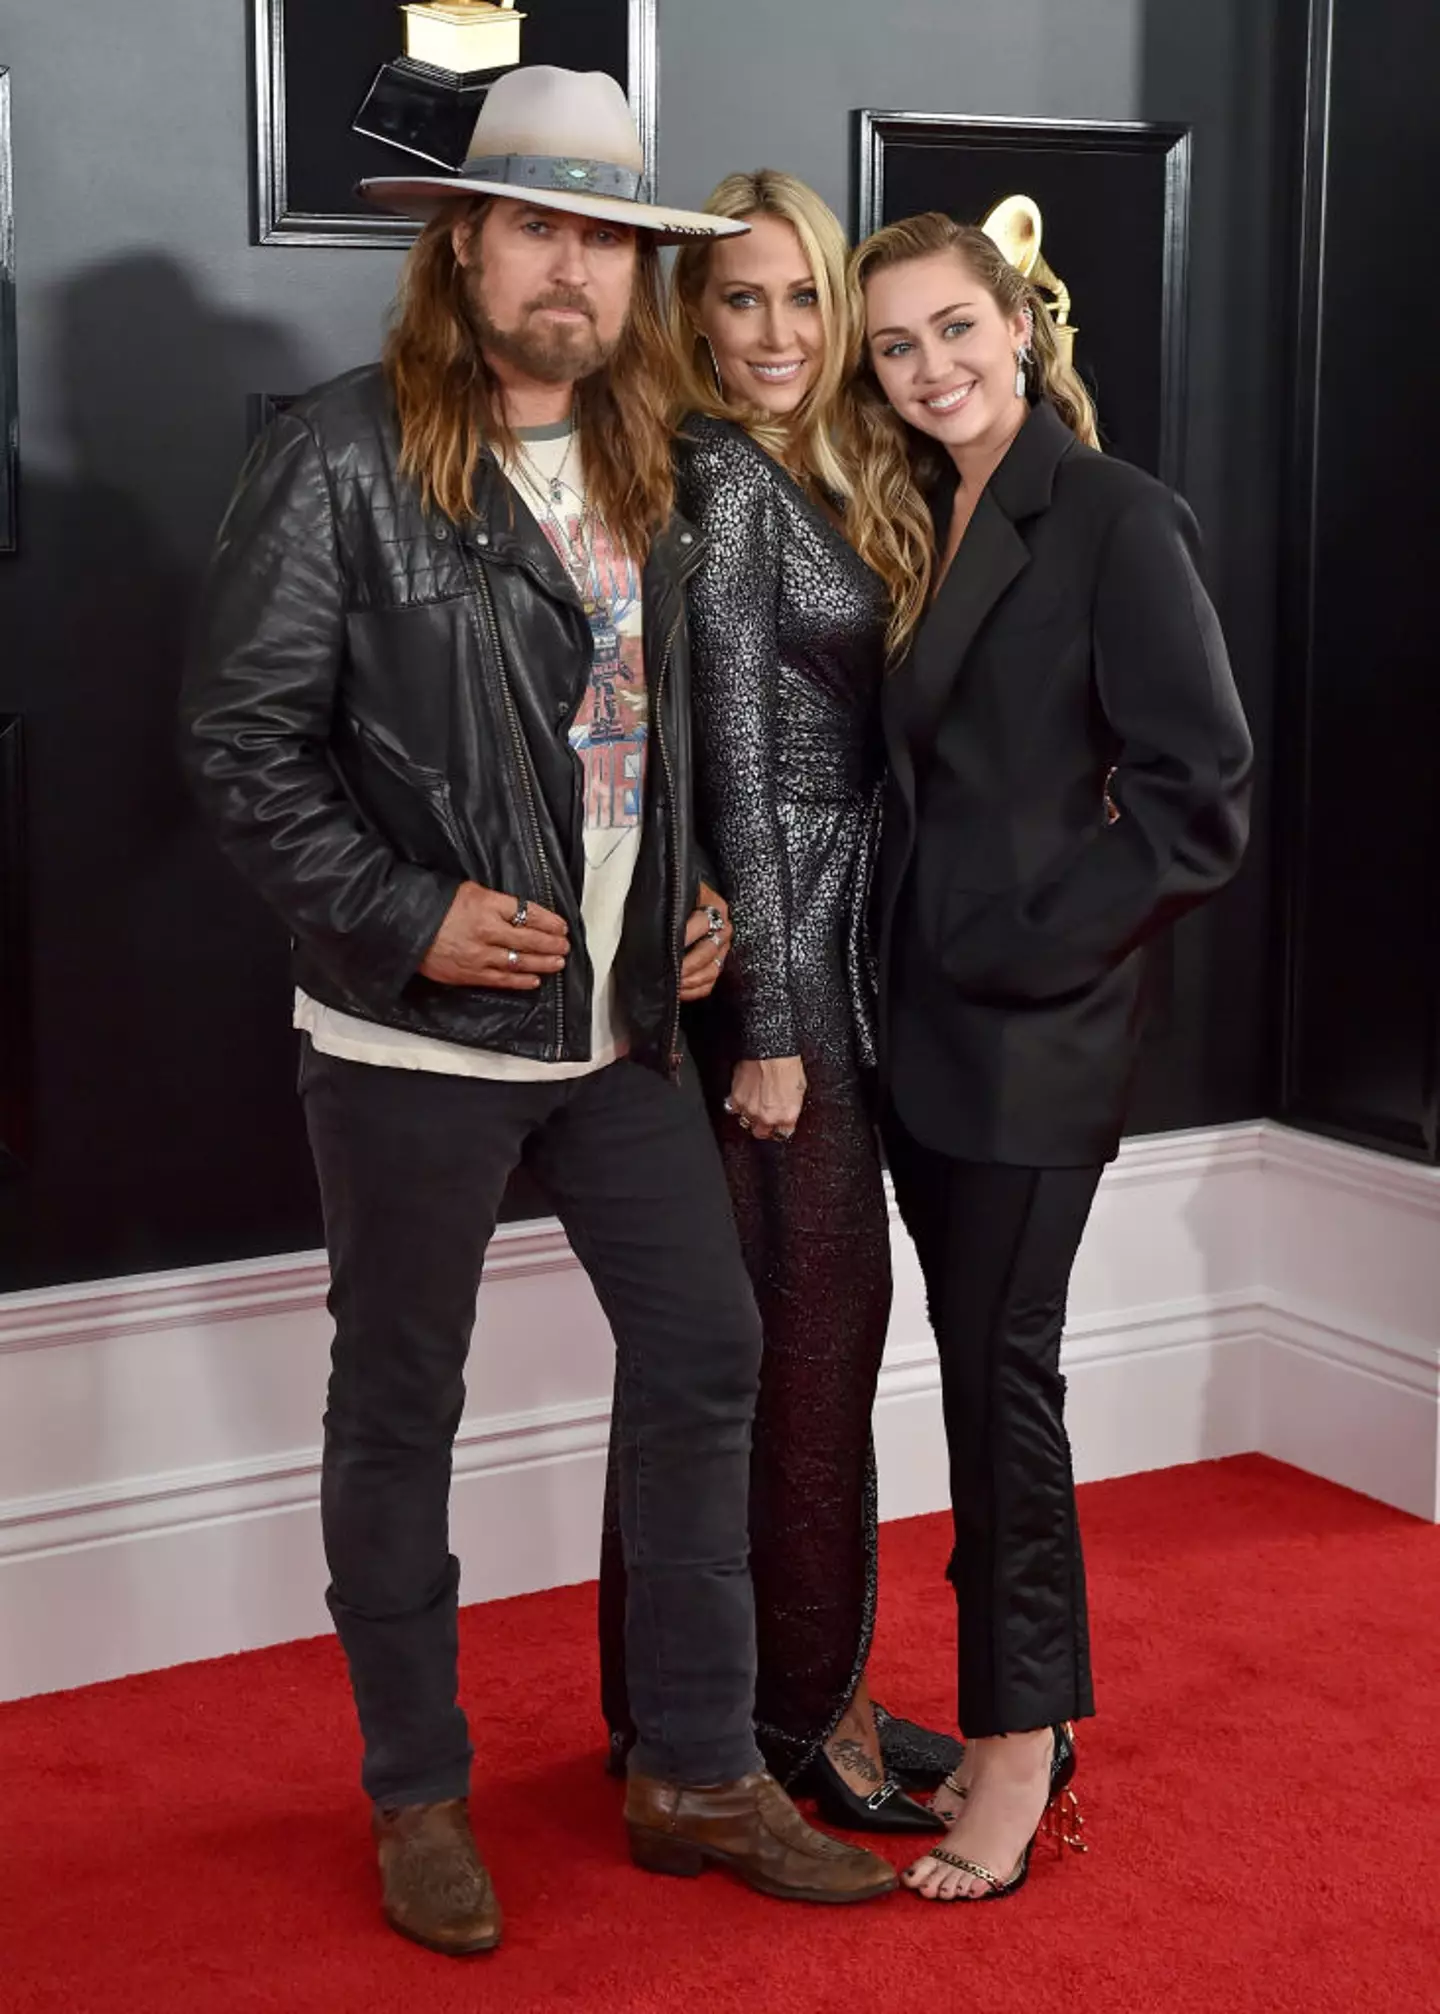 Miley with her parents at the 2019 Grammys.